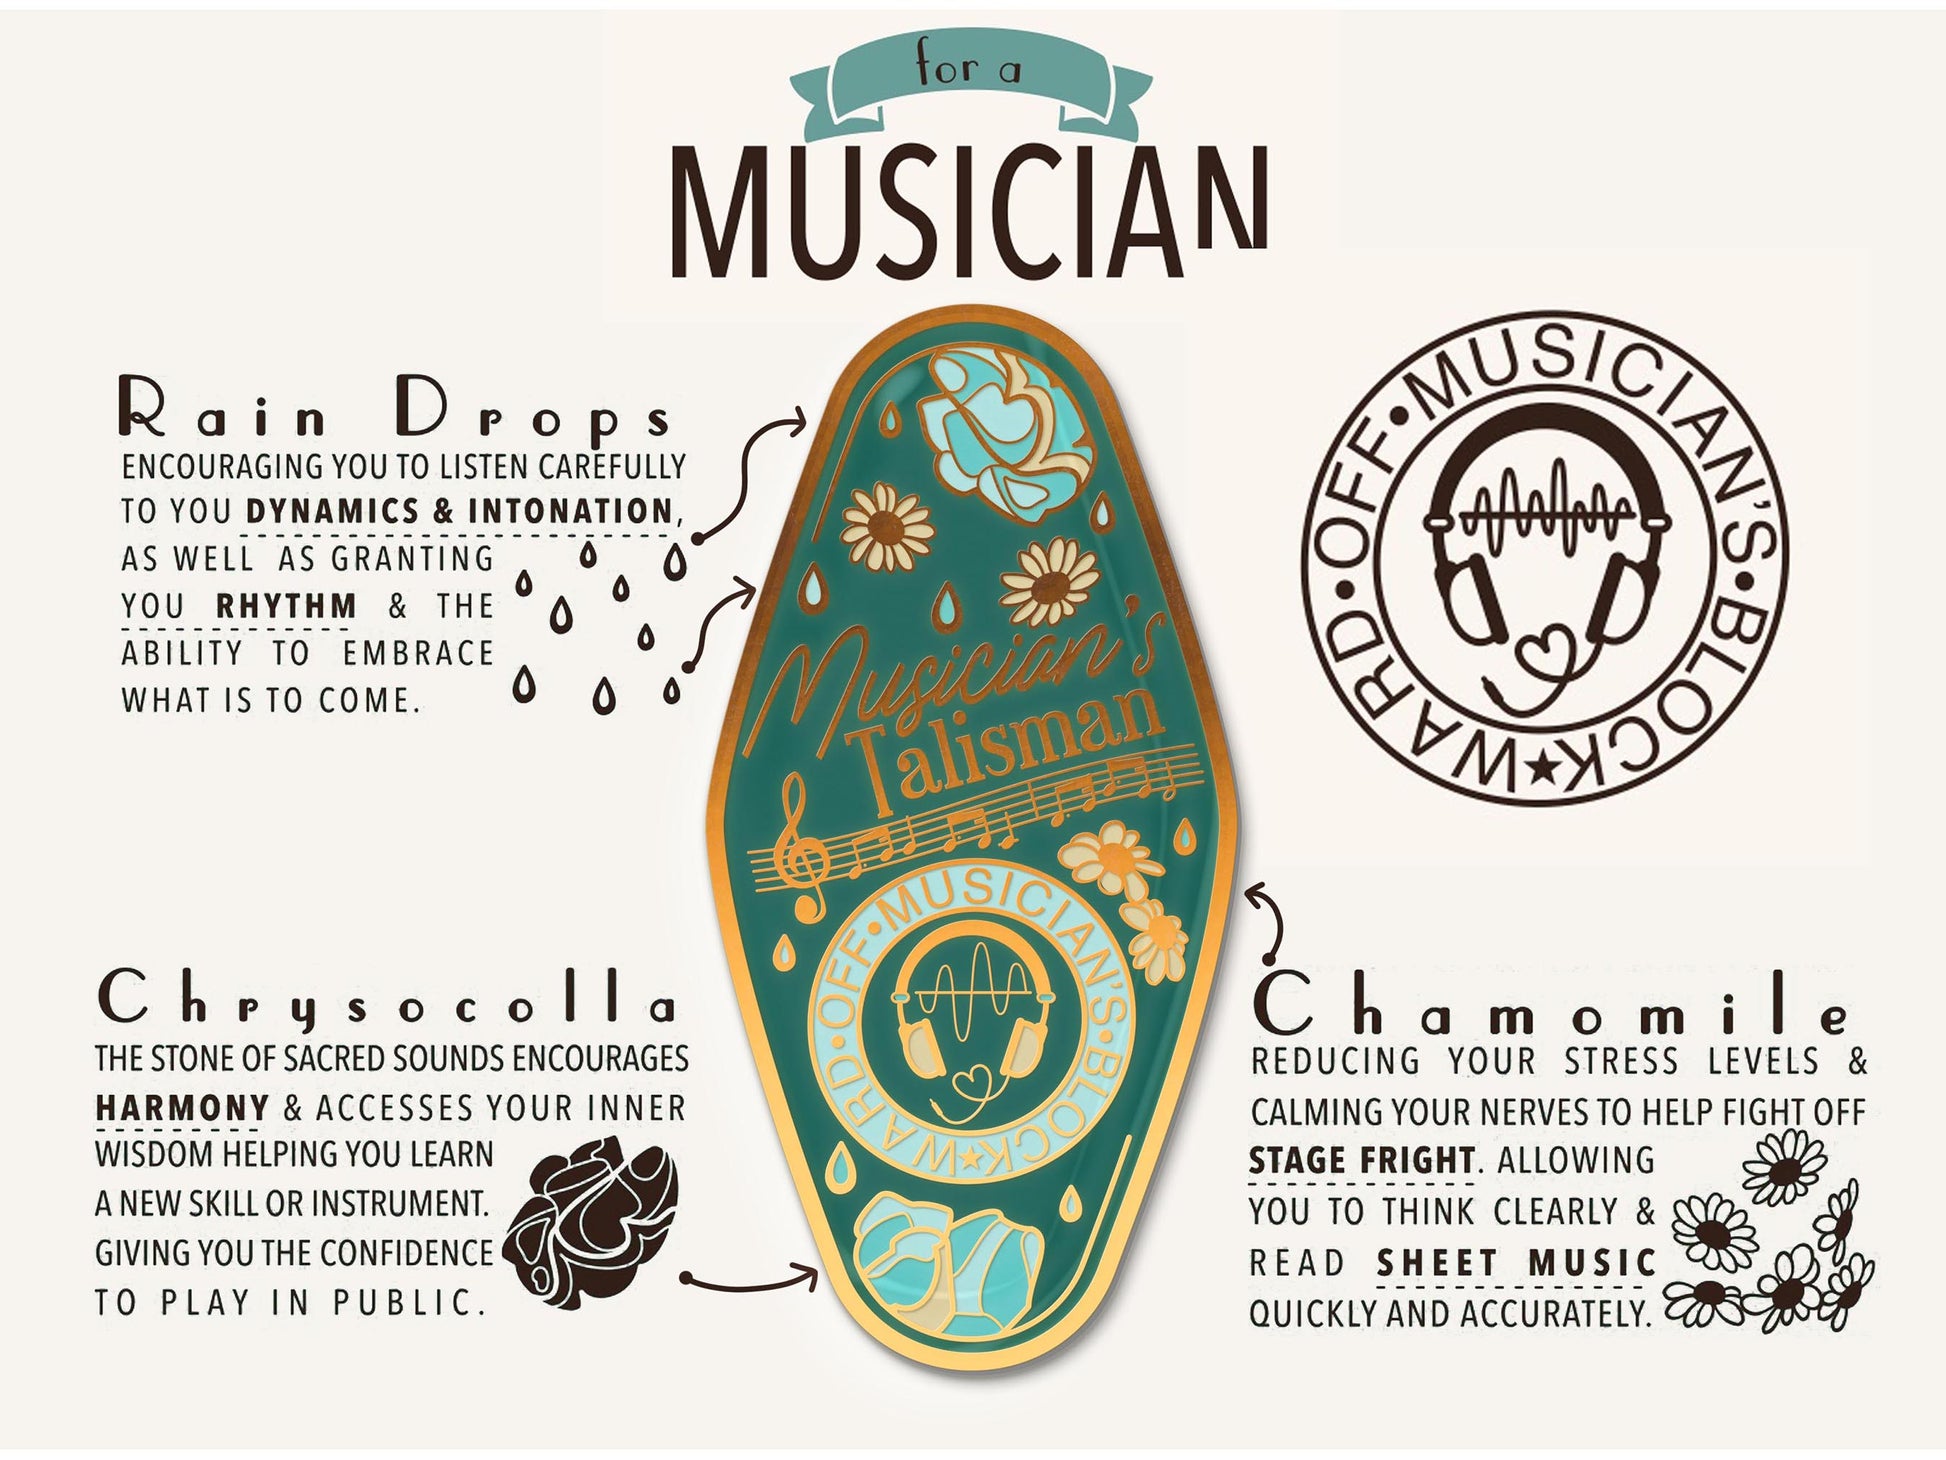 A illustrated diagram outline the symbolism of the different design elements of the for a Musician's Talisman pin. Information includes the meaning of the rain drops, chrysocolla, and chamomile